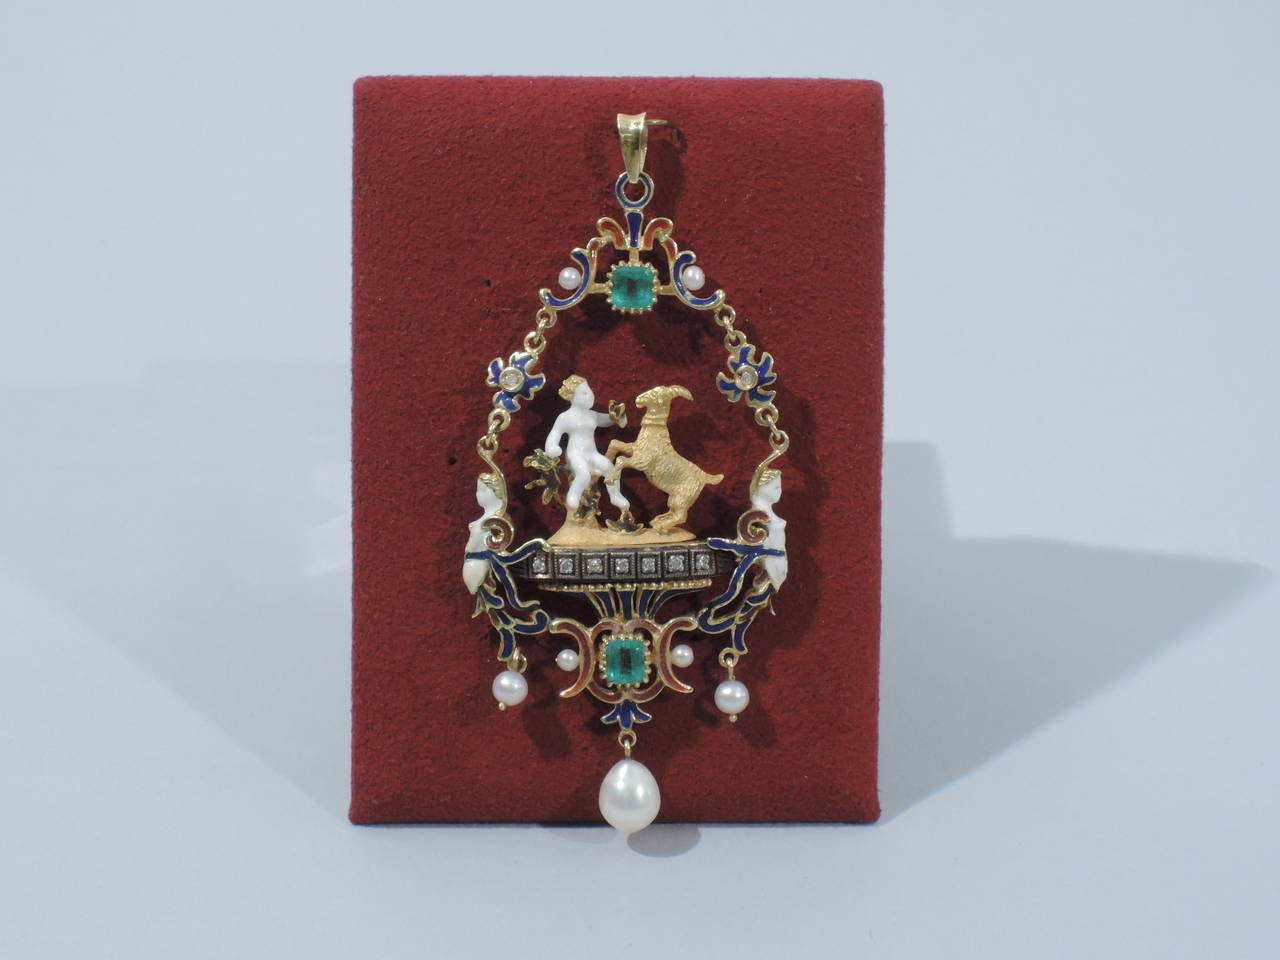 A fabulous antique 22K gold and enamel Renaissance Revival pendant featuring a white enamel maiden or goddess with gold goat on diamond-encrusted pedestal. Group framed by wreath with enamel, seed pearls, two large emeralds, and 2 enamel female